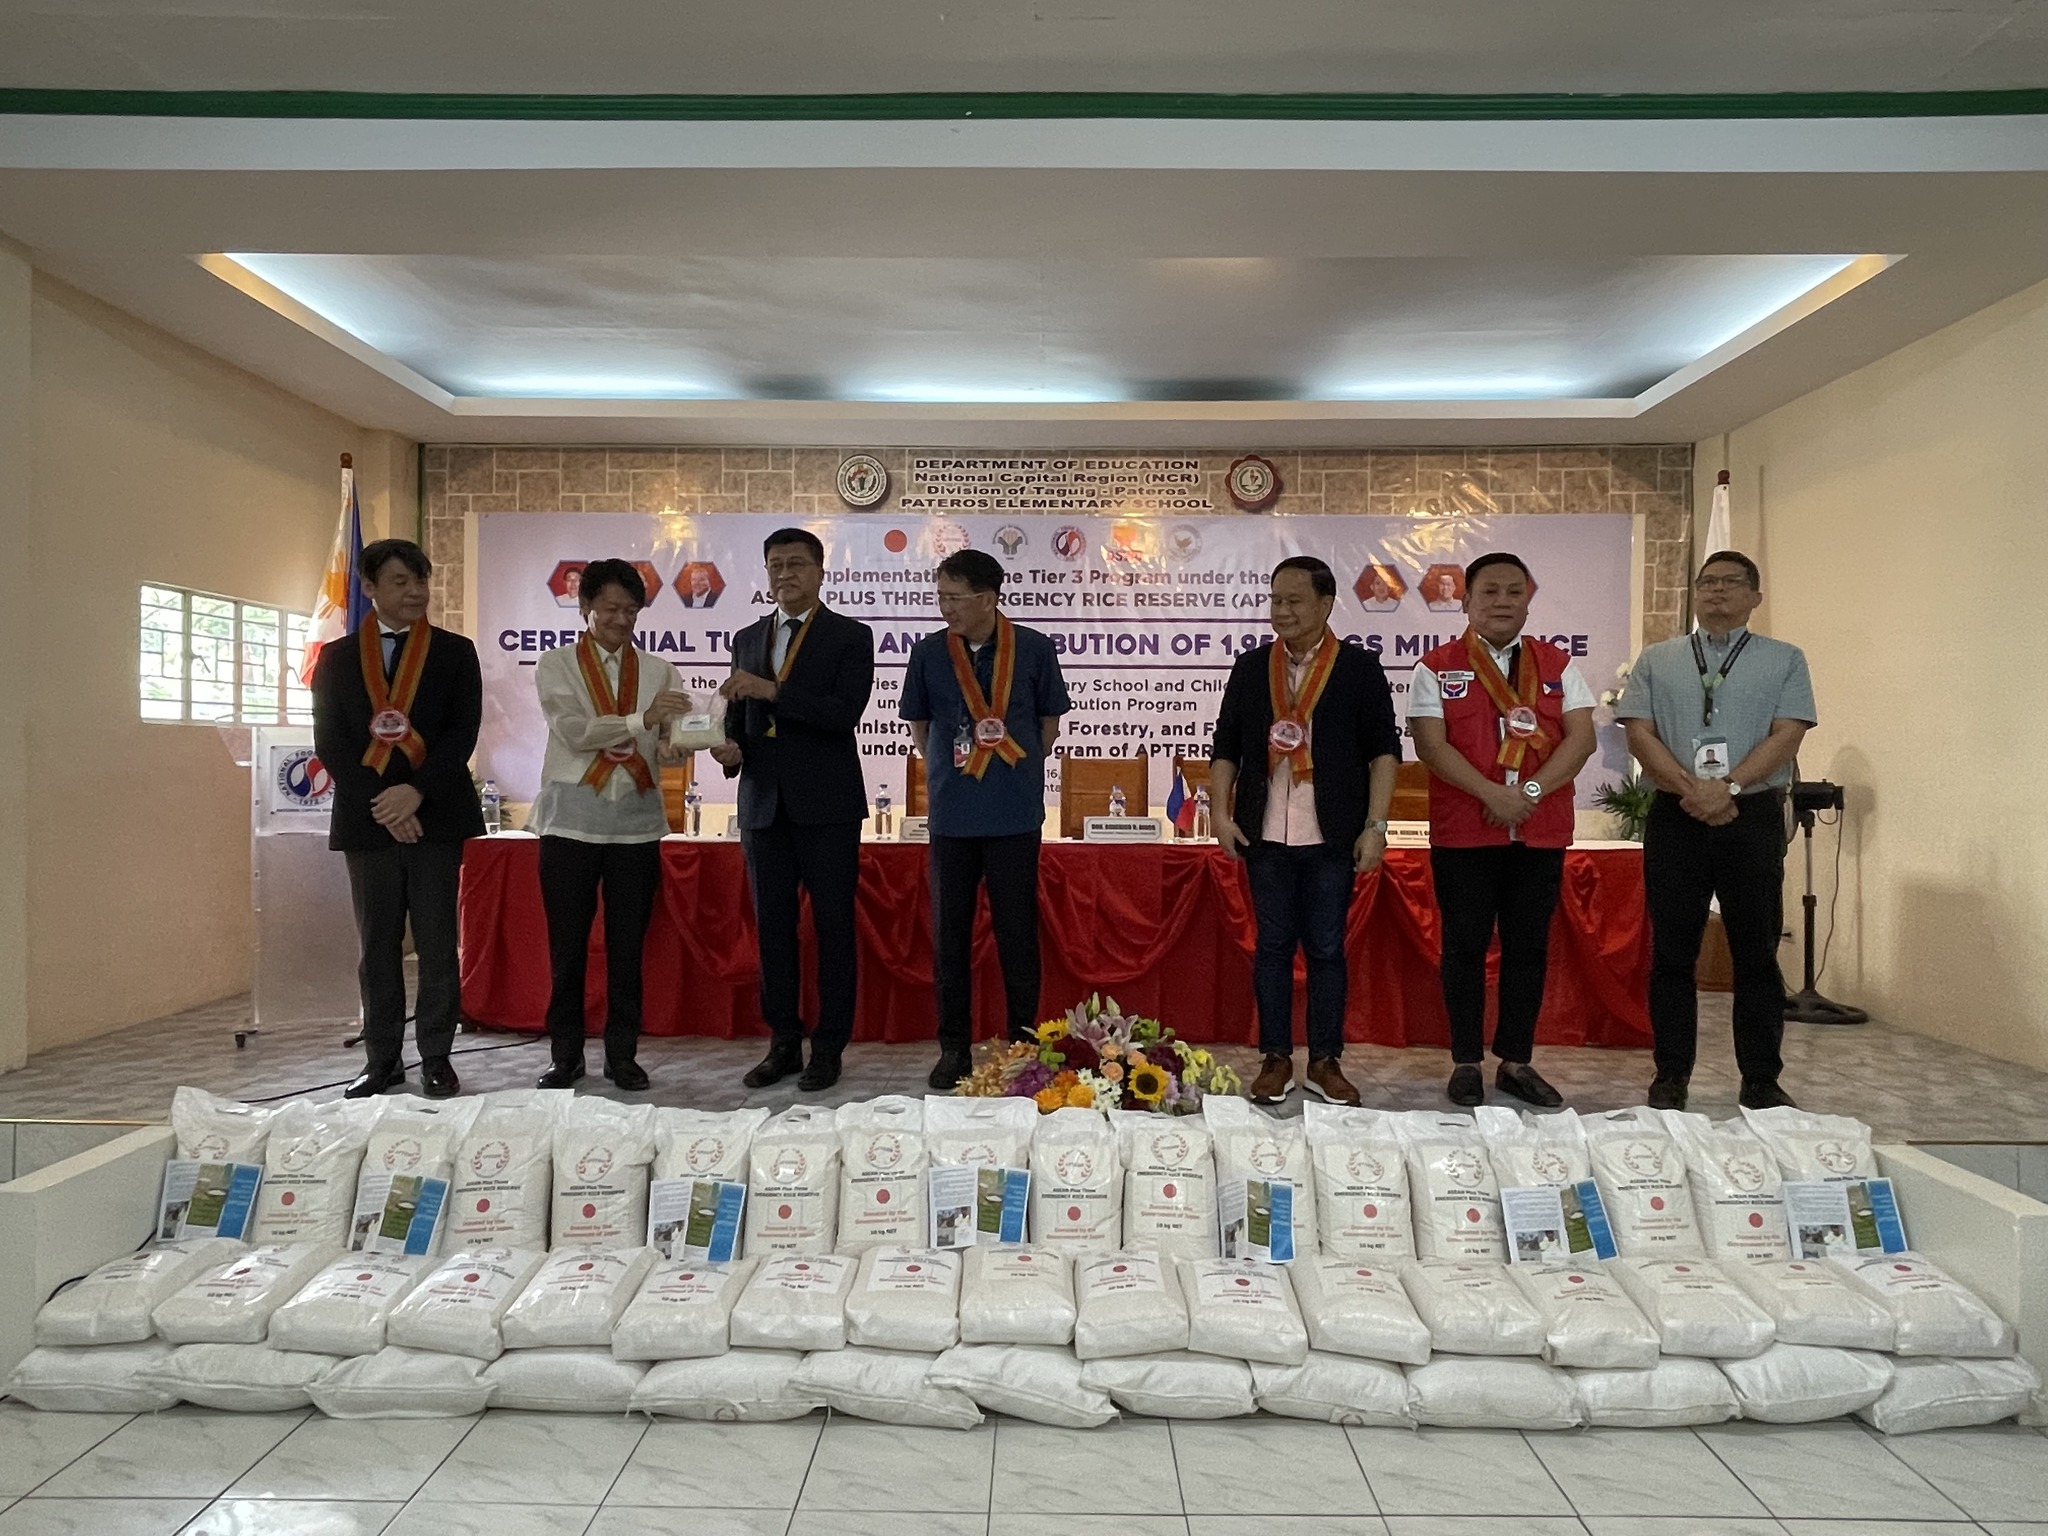 Japan donates 20 metric tons of rice to Pateros Elementary School